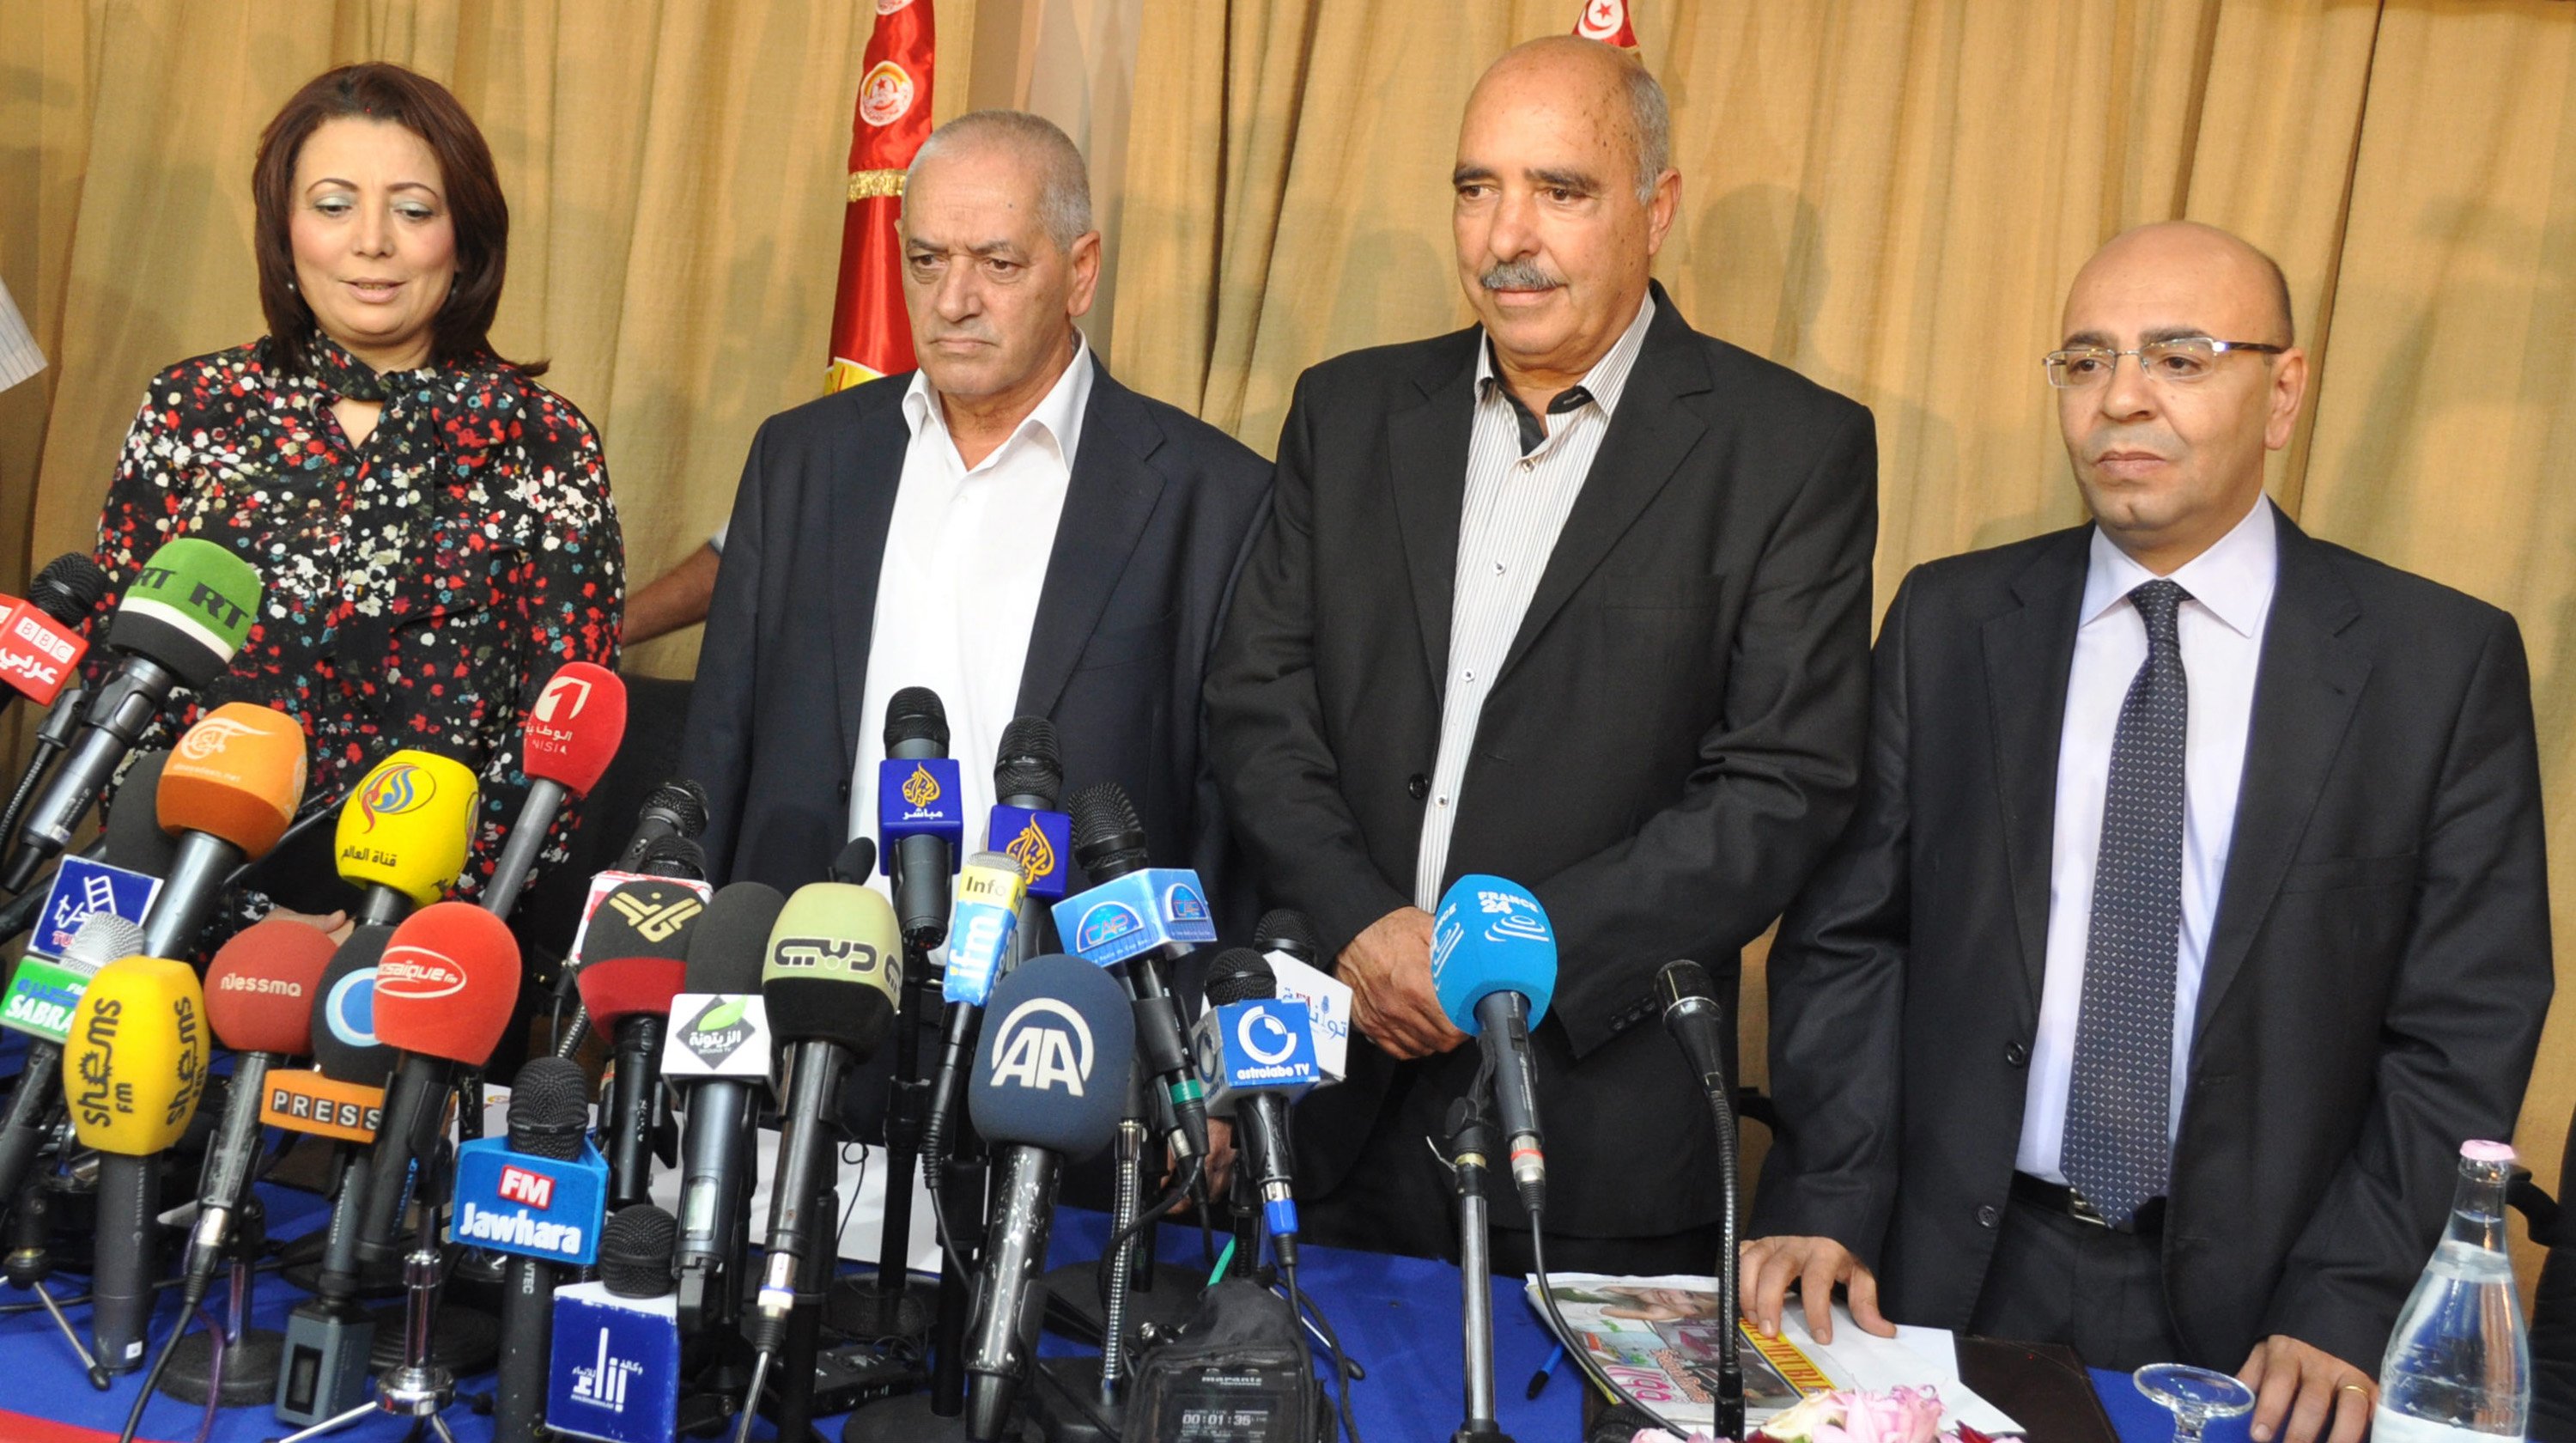 Representatives of the Tunisian National Dialogue Quartet attend a press conference on Nobel Peace Prize on Oct. 9, 2015 in Tunis, Tunisia. The Tunisian National Dialogue Quartet won the 2015 Nobel Peace Prize on Friday for "its decisive contribution to the building of a pluralistic democracy in Tunisia," the Norwegian Nobel Committee announced. (Adel Ezzine/Xinhua/Zuma Press/TNS)